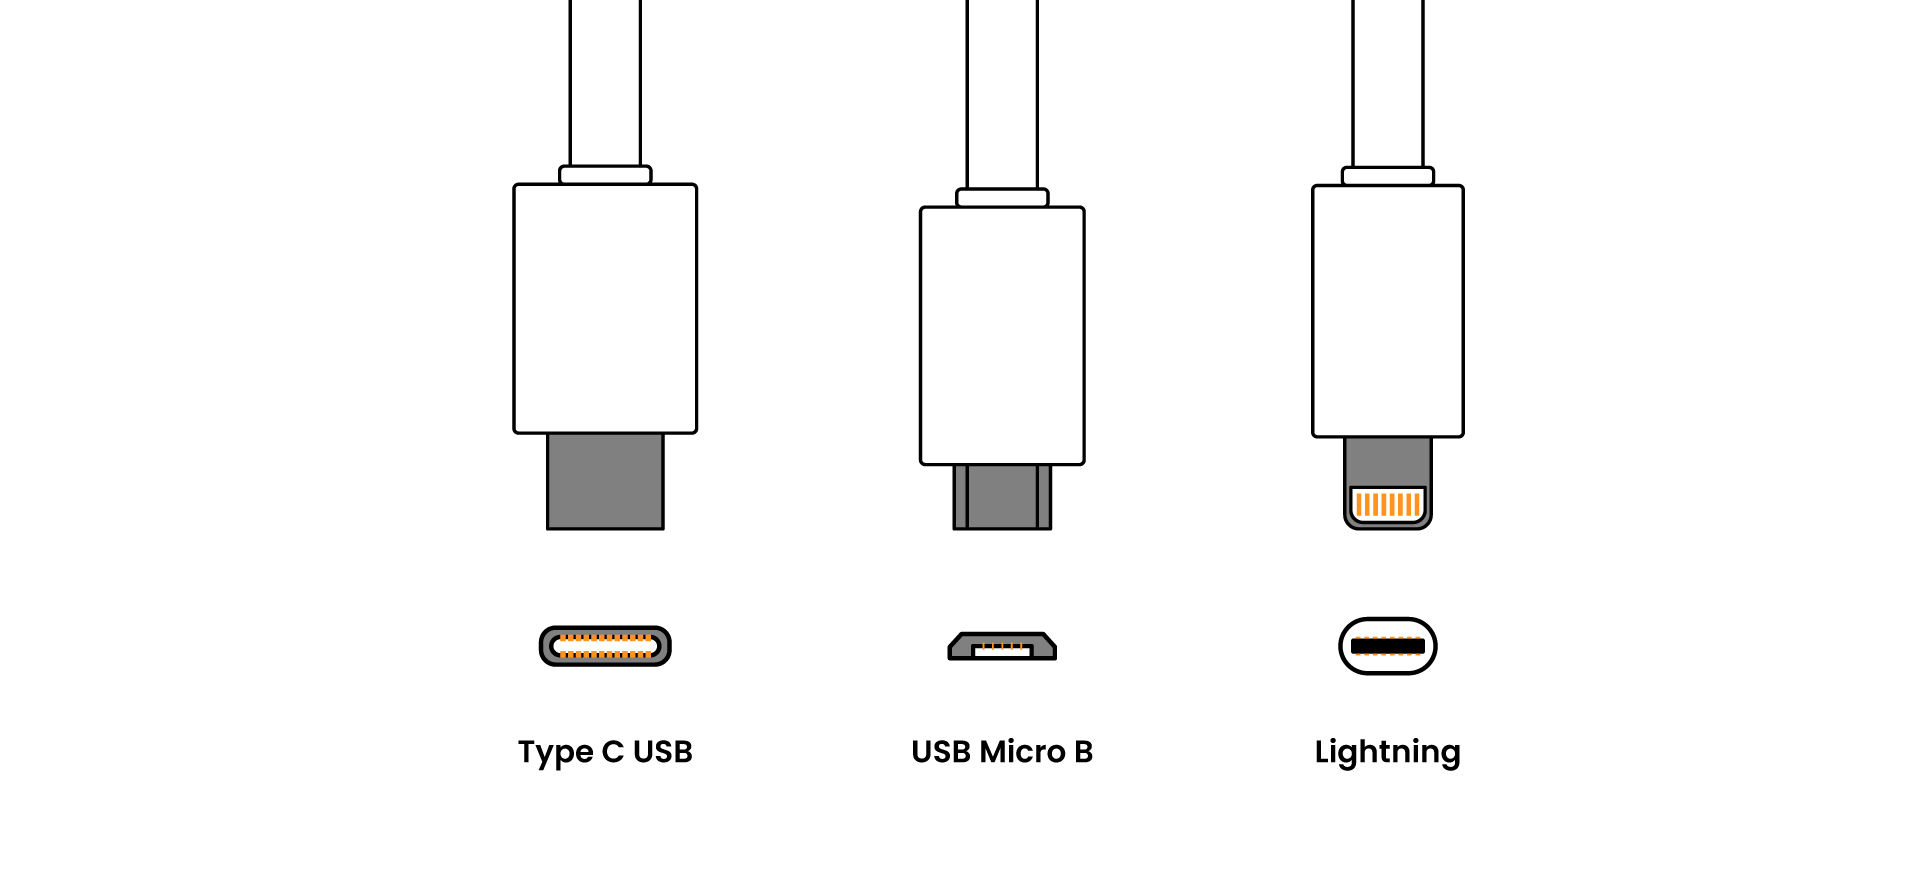 Micro USB Cable - The Ultimate Guide On How To Choose